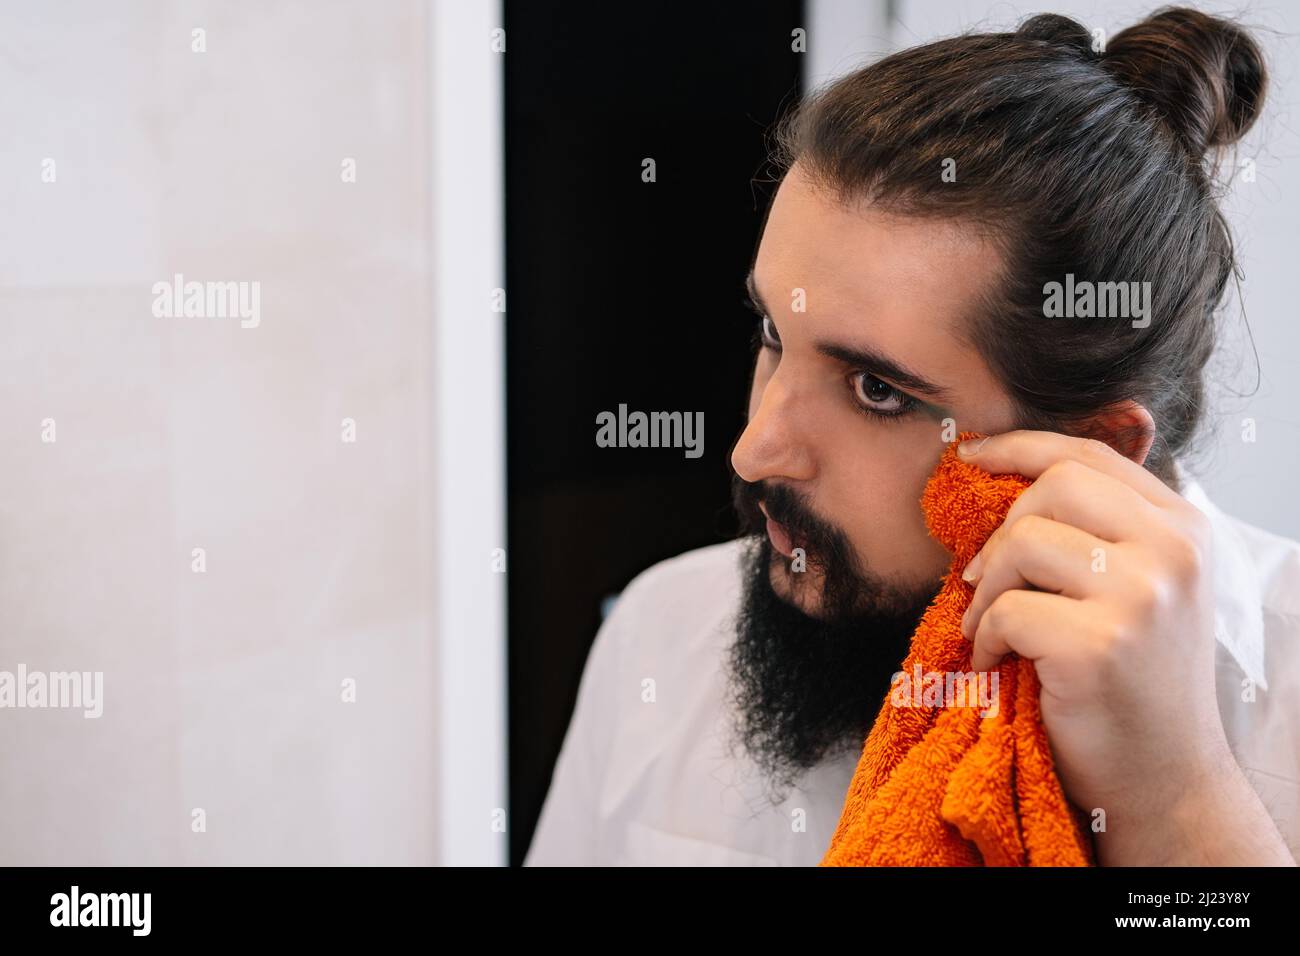 young man, touching up his eye make-up with a towel Stock Photo